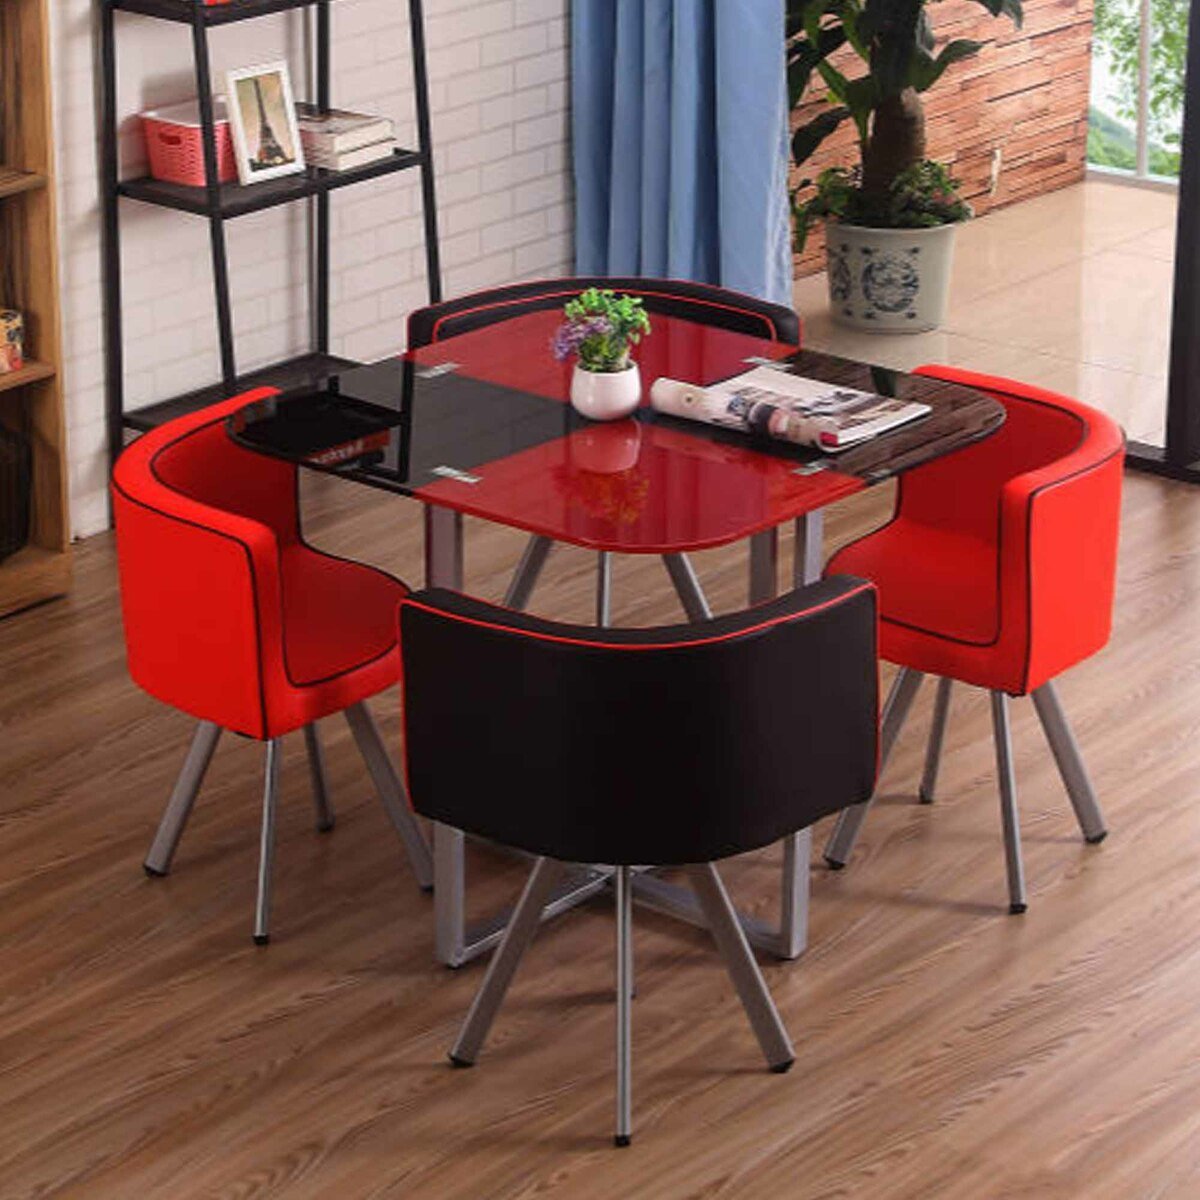 Maple Leaf Home Glass Dining Table Size: H75 x W90 x L90cm + 4 Chair Red & Black Color